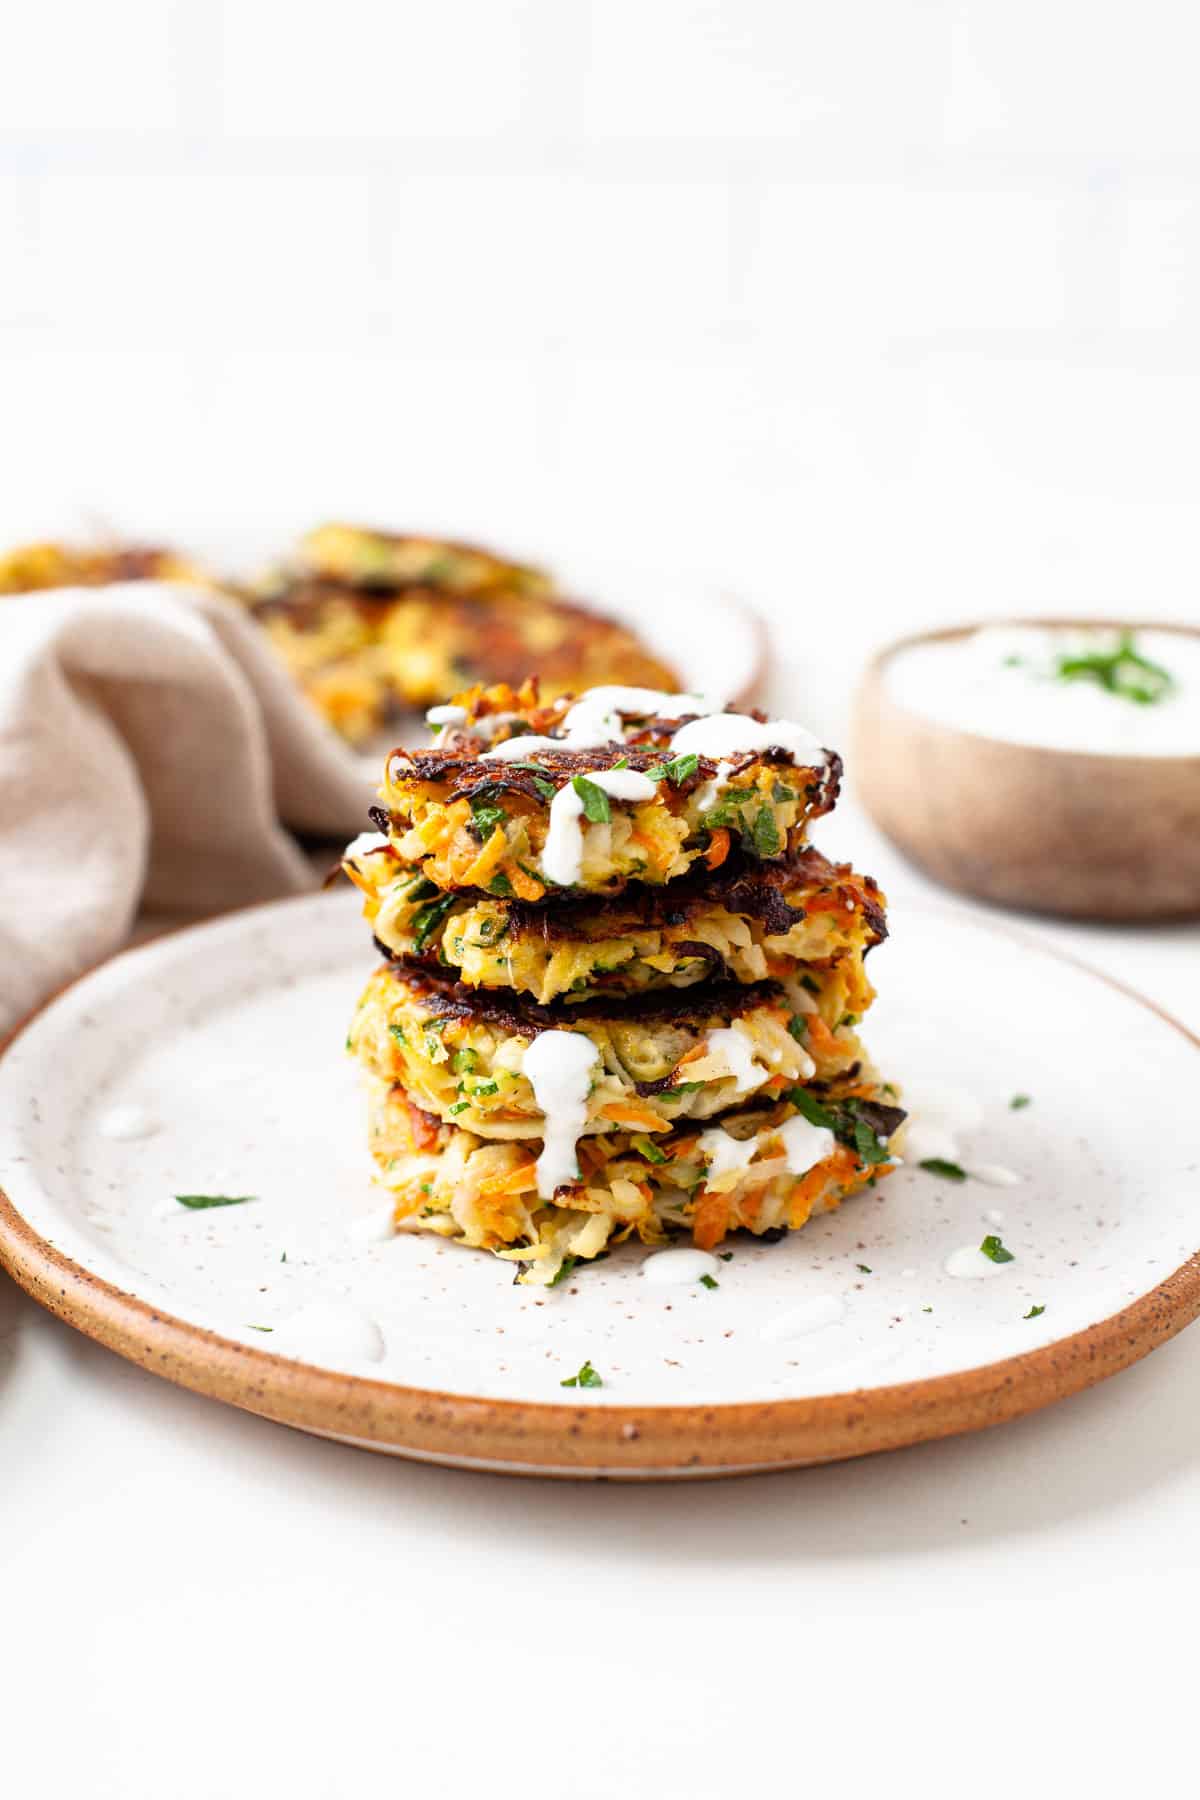 stack of four kohlrabi fritters on a speckled plate with herb yogurt sauce drizzled on top